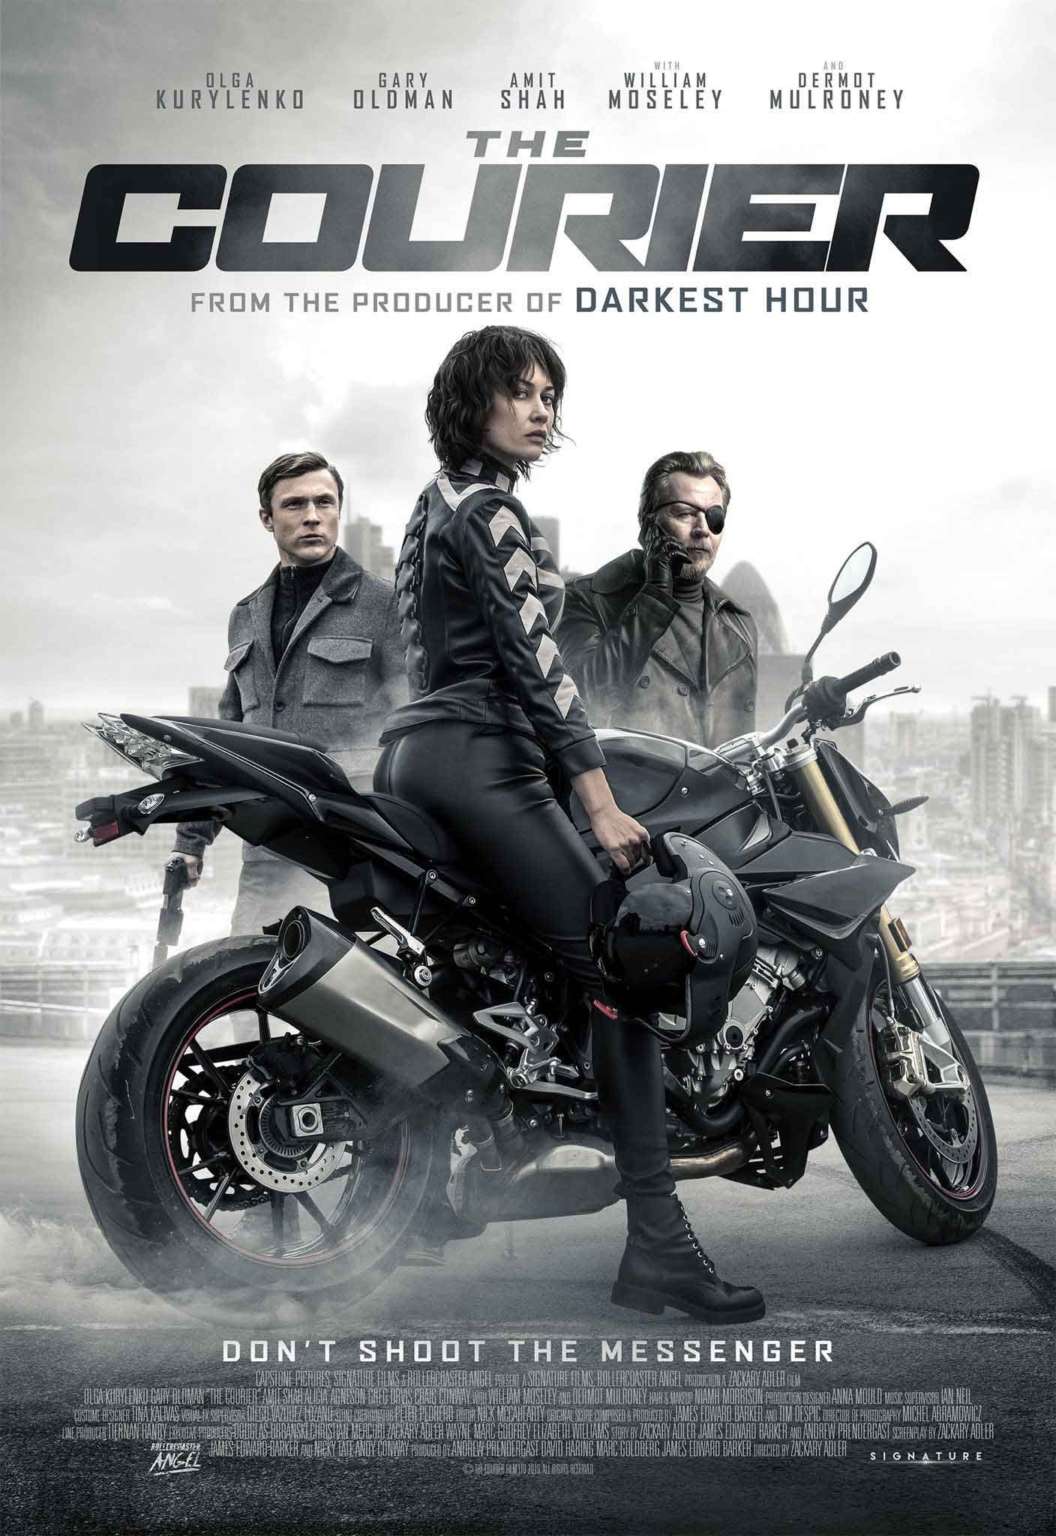 Inspiration Friday 10 Best Biker Movies on Netflix • Total Motorcycle